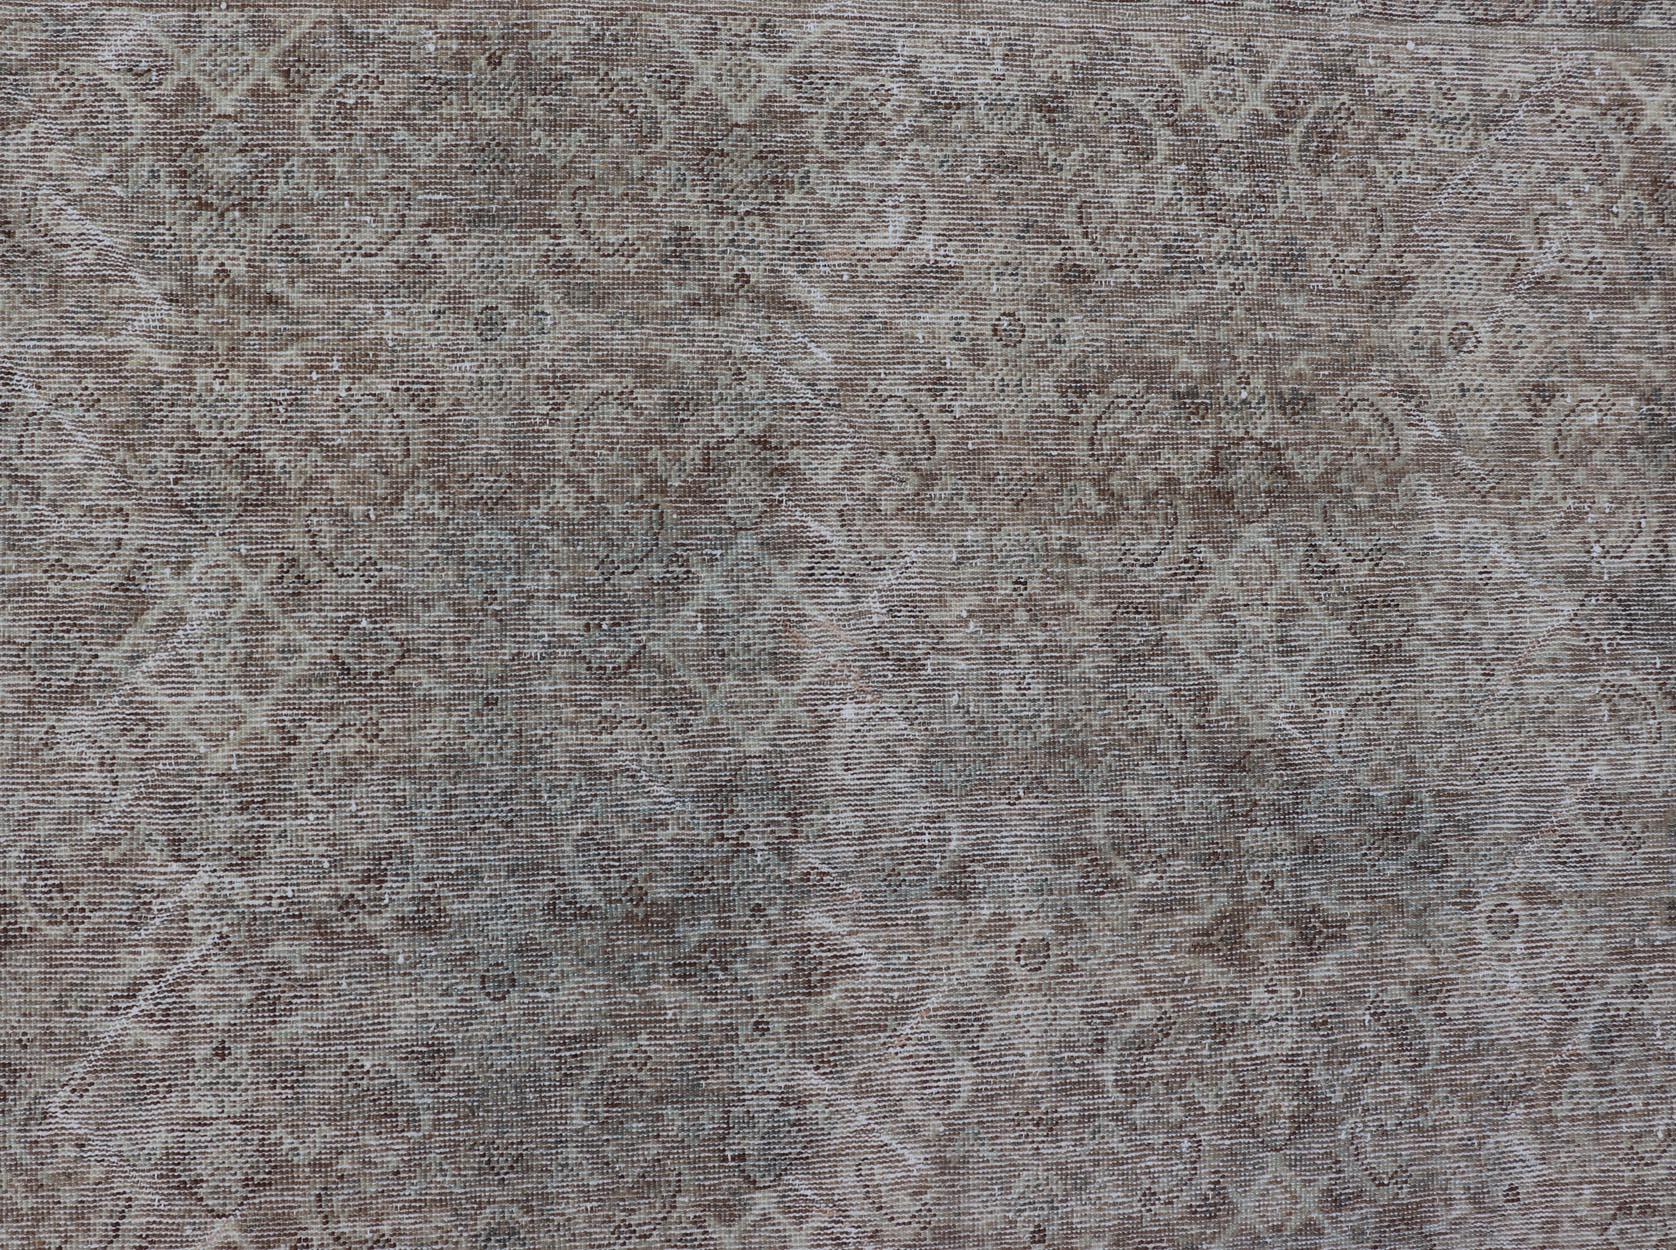 Antique Persian Distressed Mahal Rug in Warm Earthy Tones with All-Over Design 3